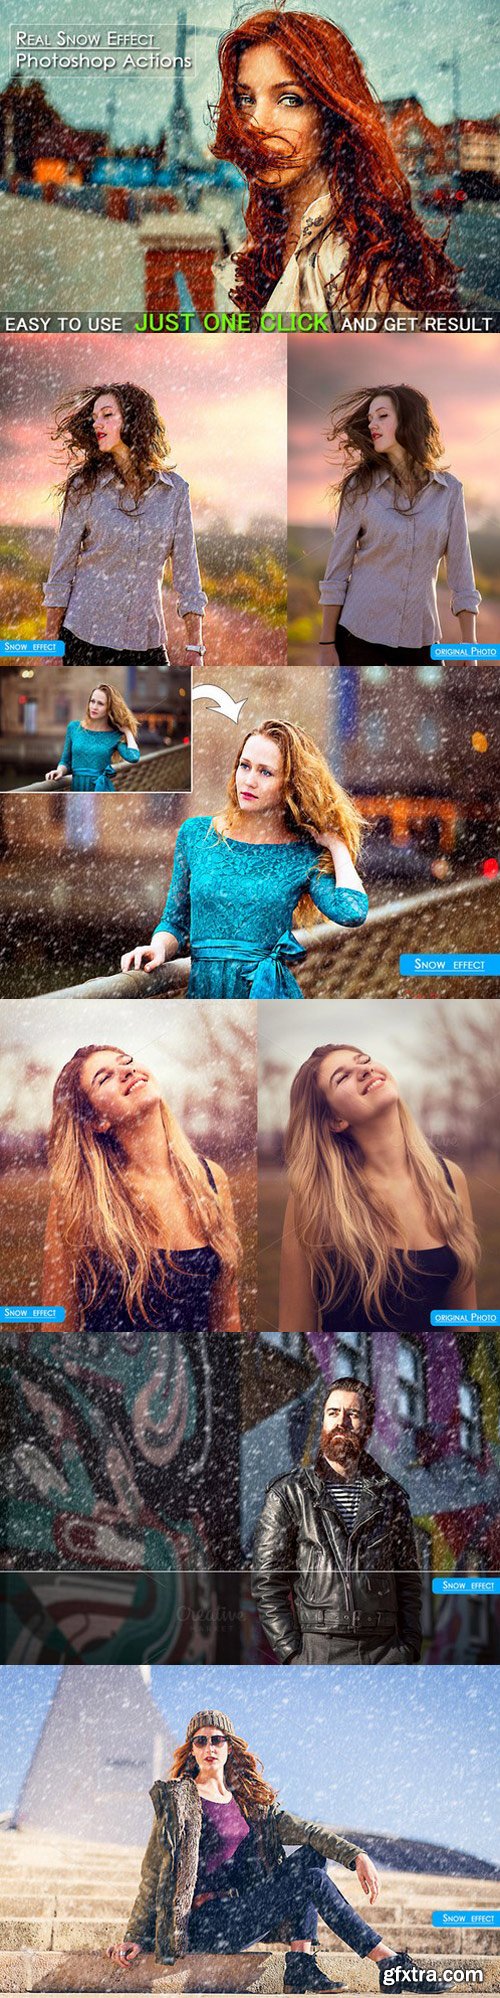 CM - Real Snow Effect Photoshop Actions 576326